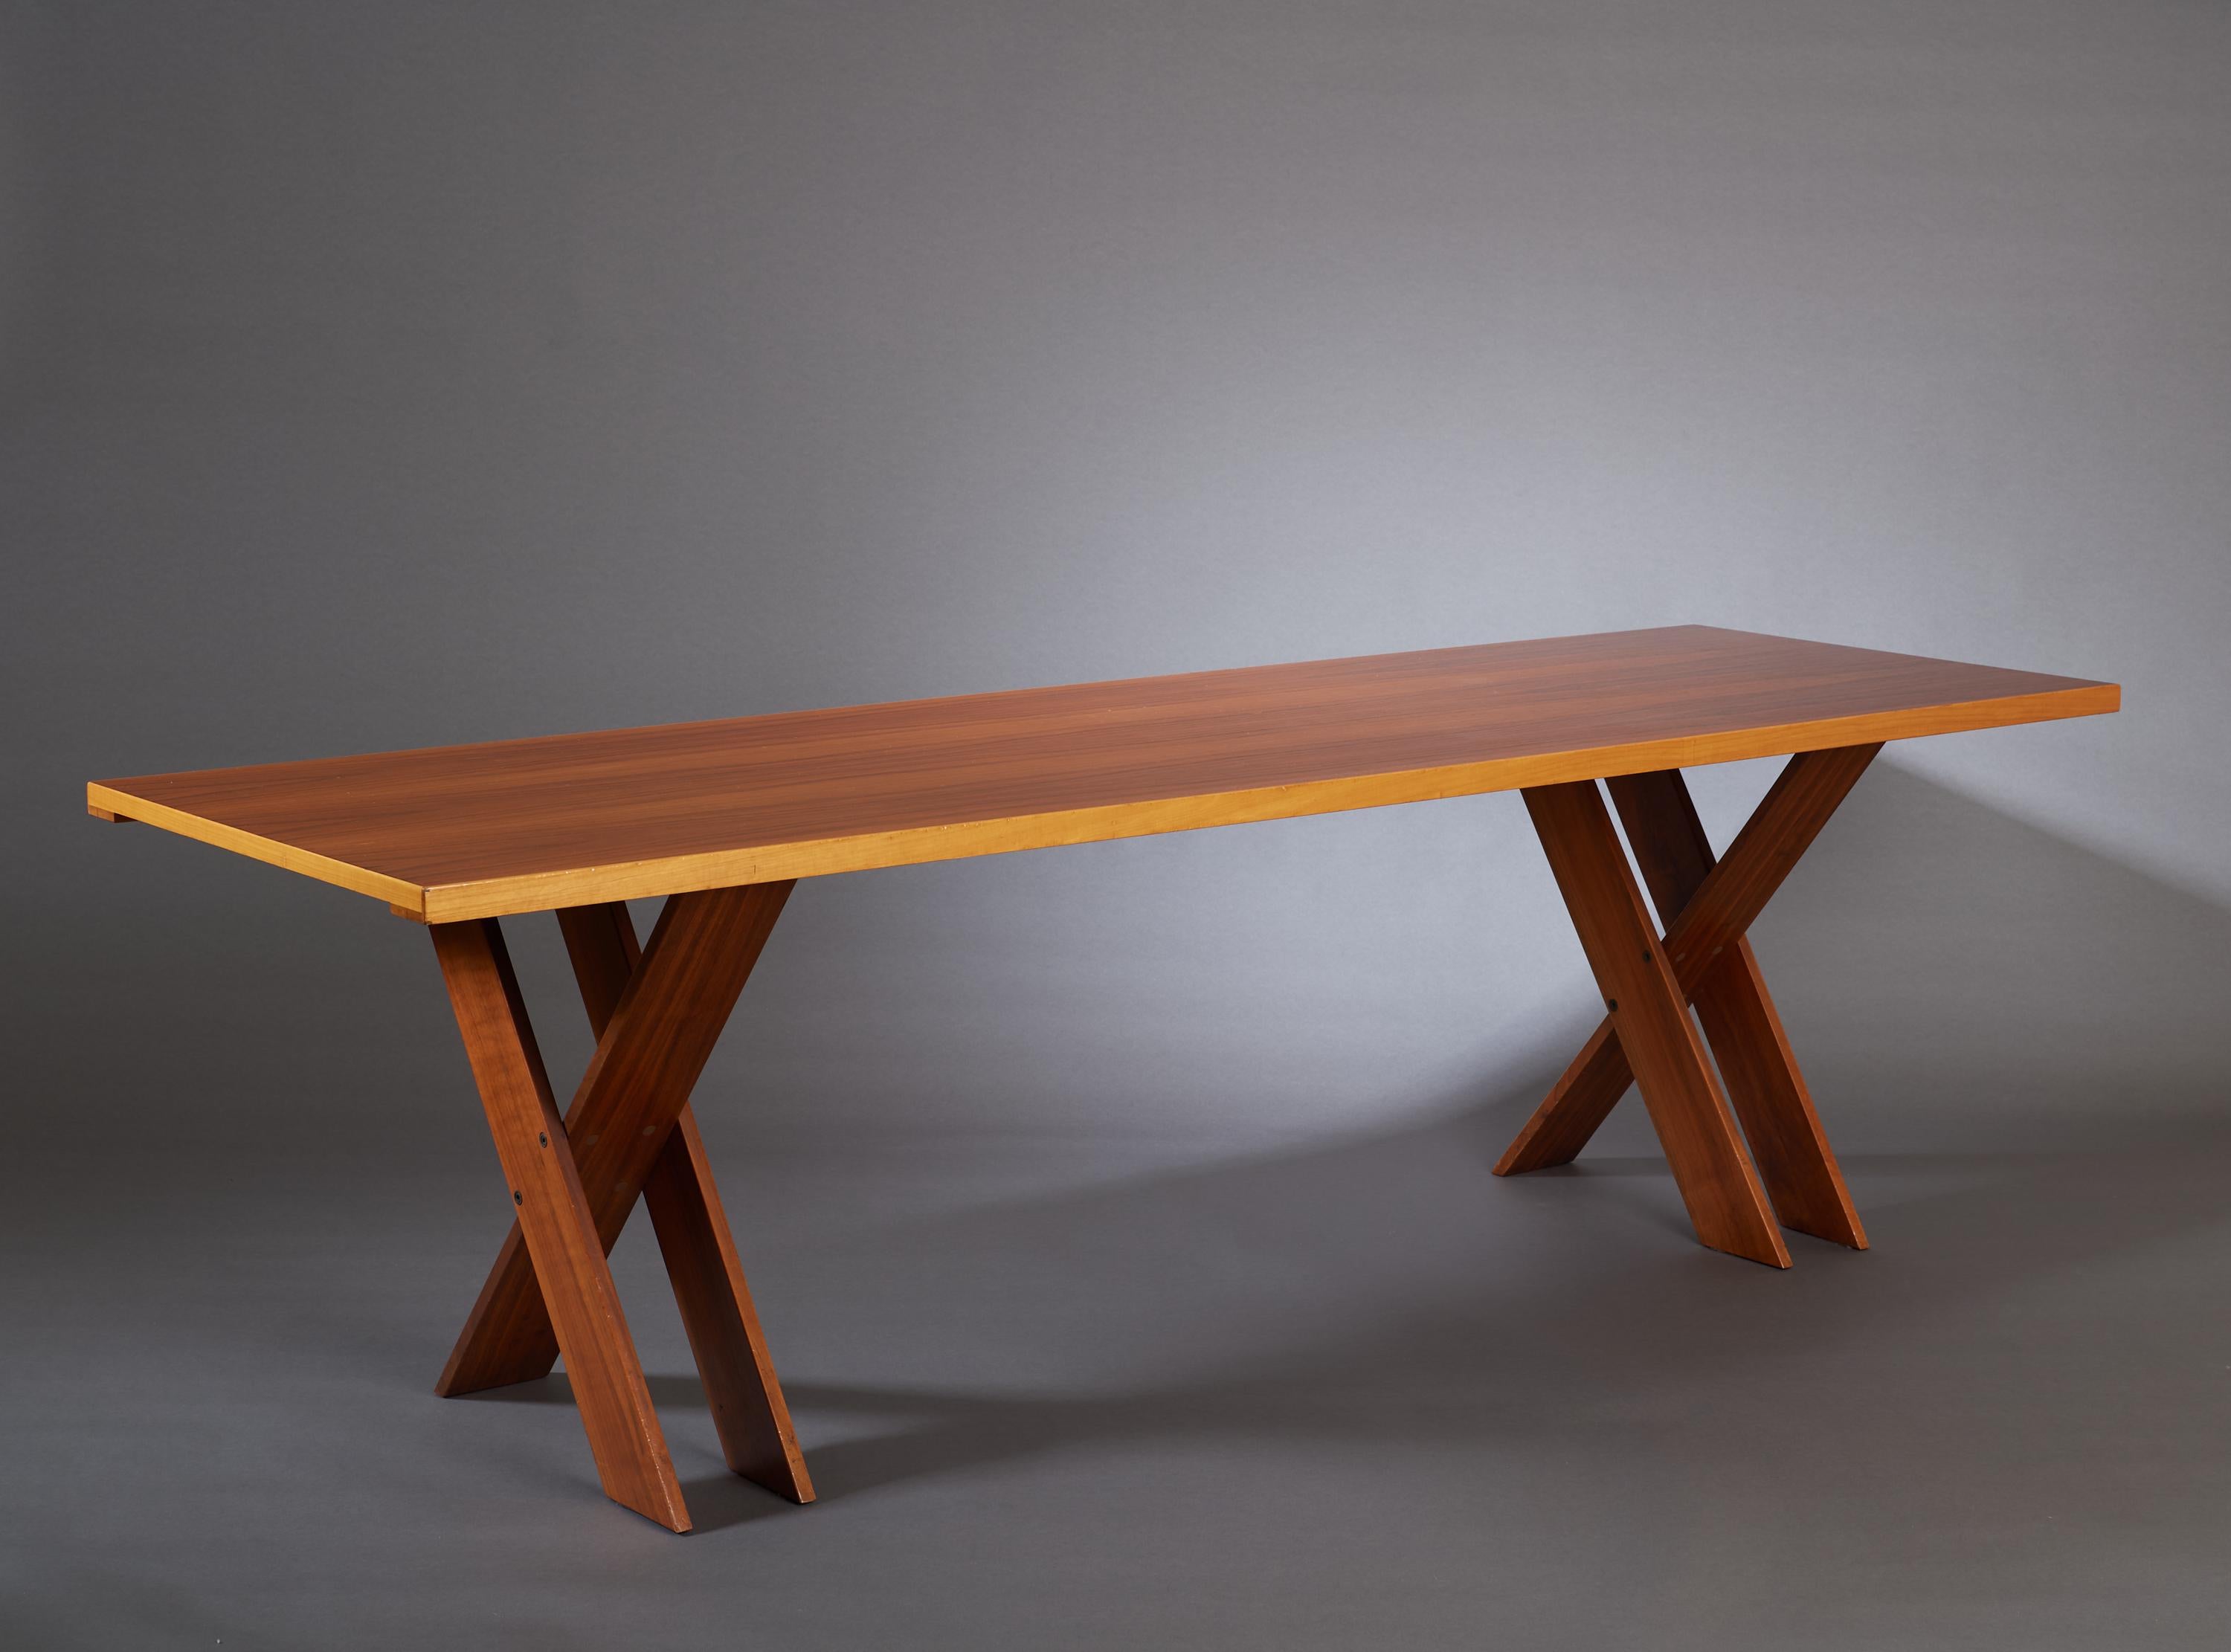 Polished Marco Zanuso Large Architectural X-Leg Dining Table in Walnut, Italy 1974 For Sale